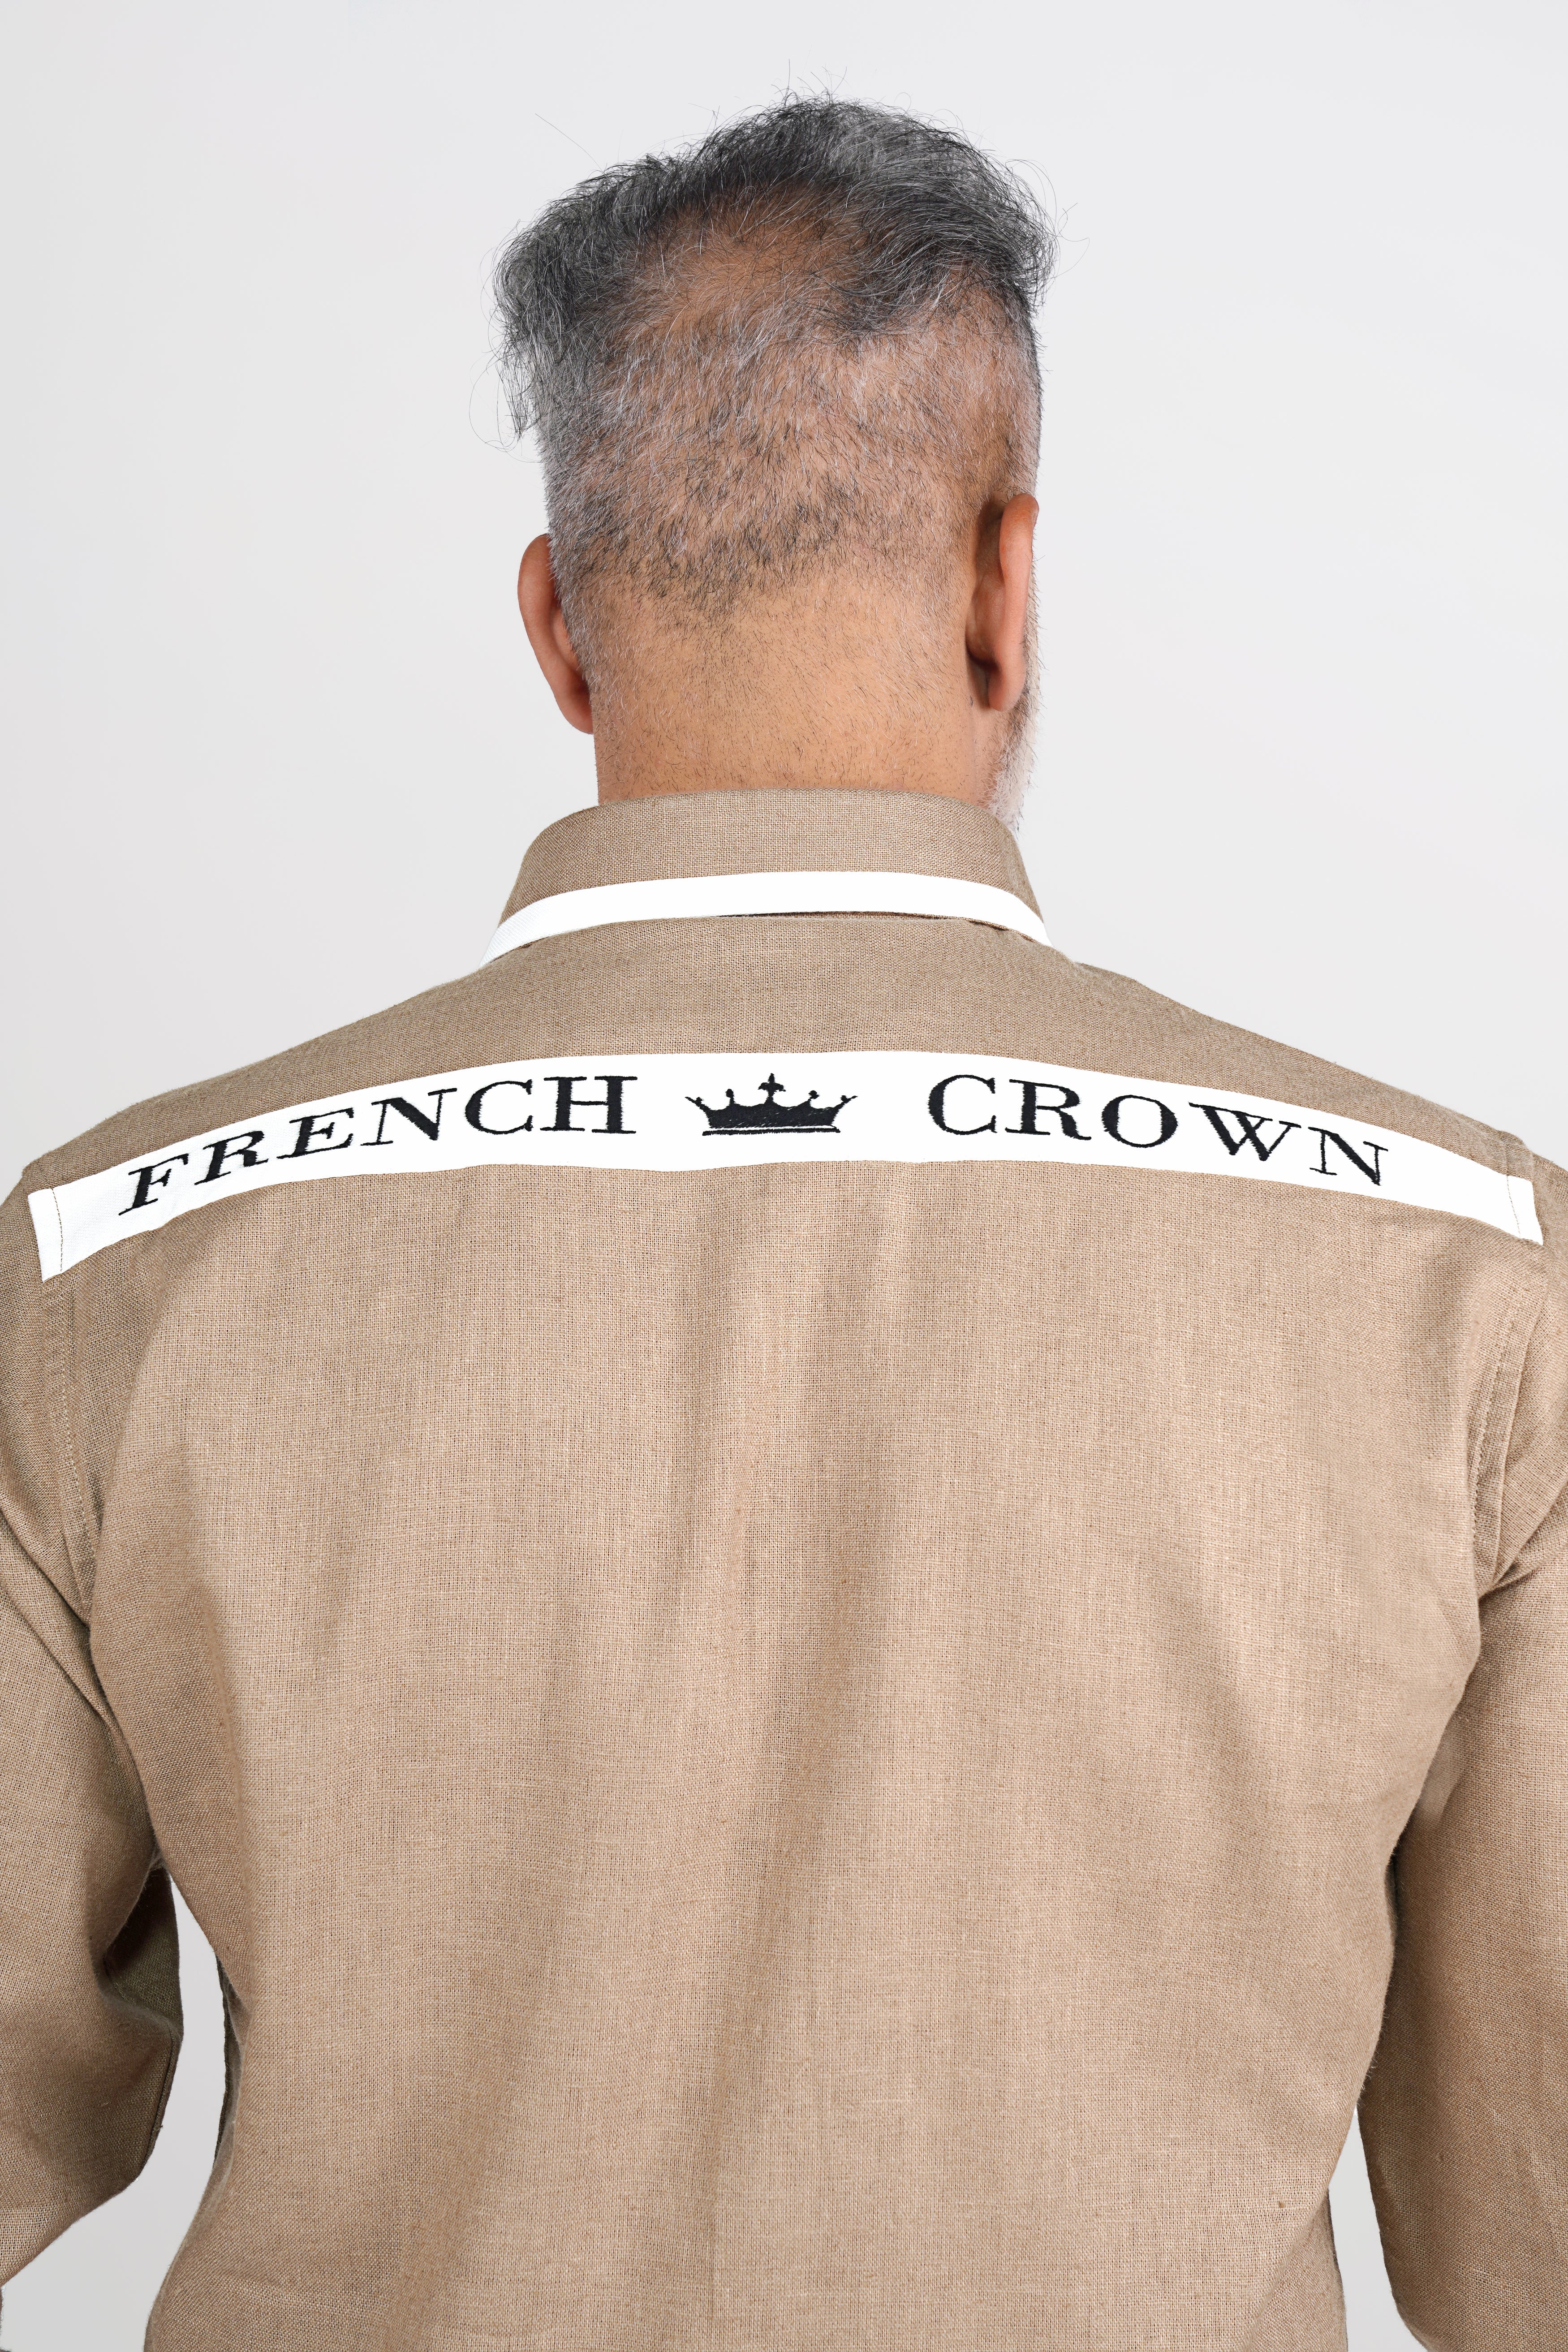 Fawn Brown French Crown Patch Work Luxurious Linen Designer Shirt